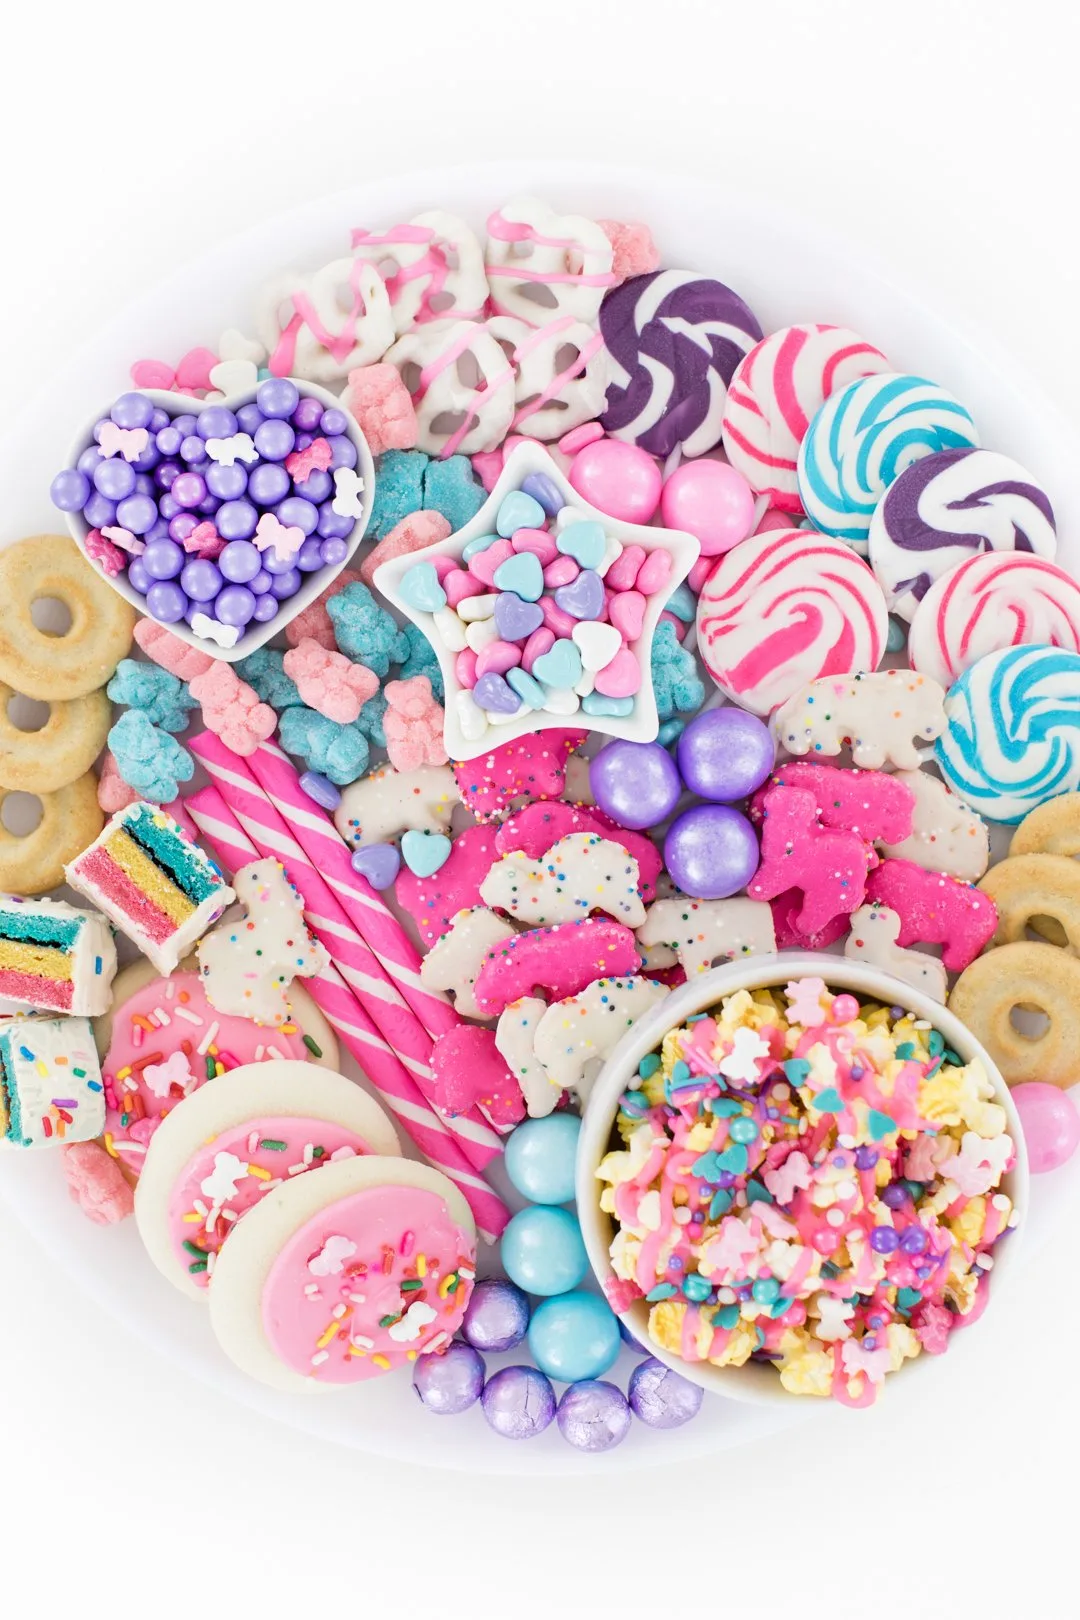 pretty pastel snack tray with popcorn, candy sticks, gumballs, pastel covered pretzels